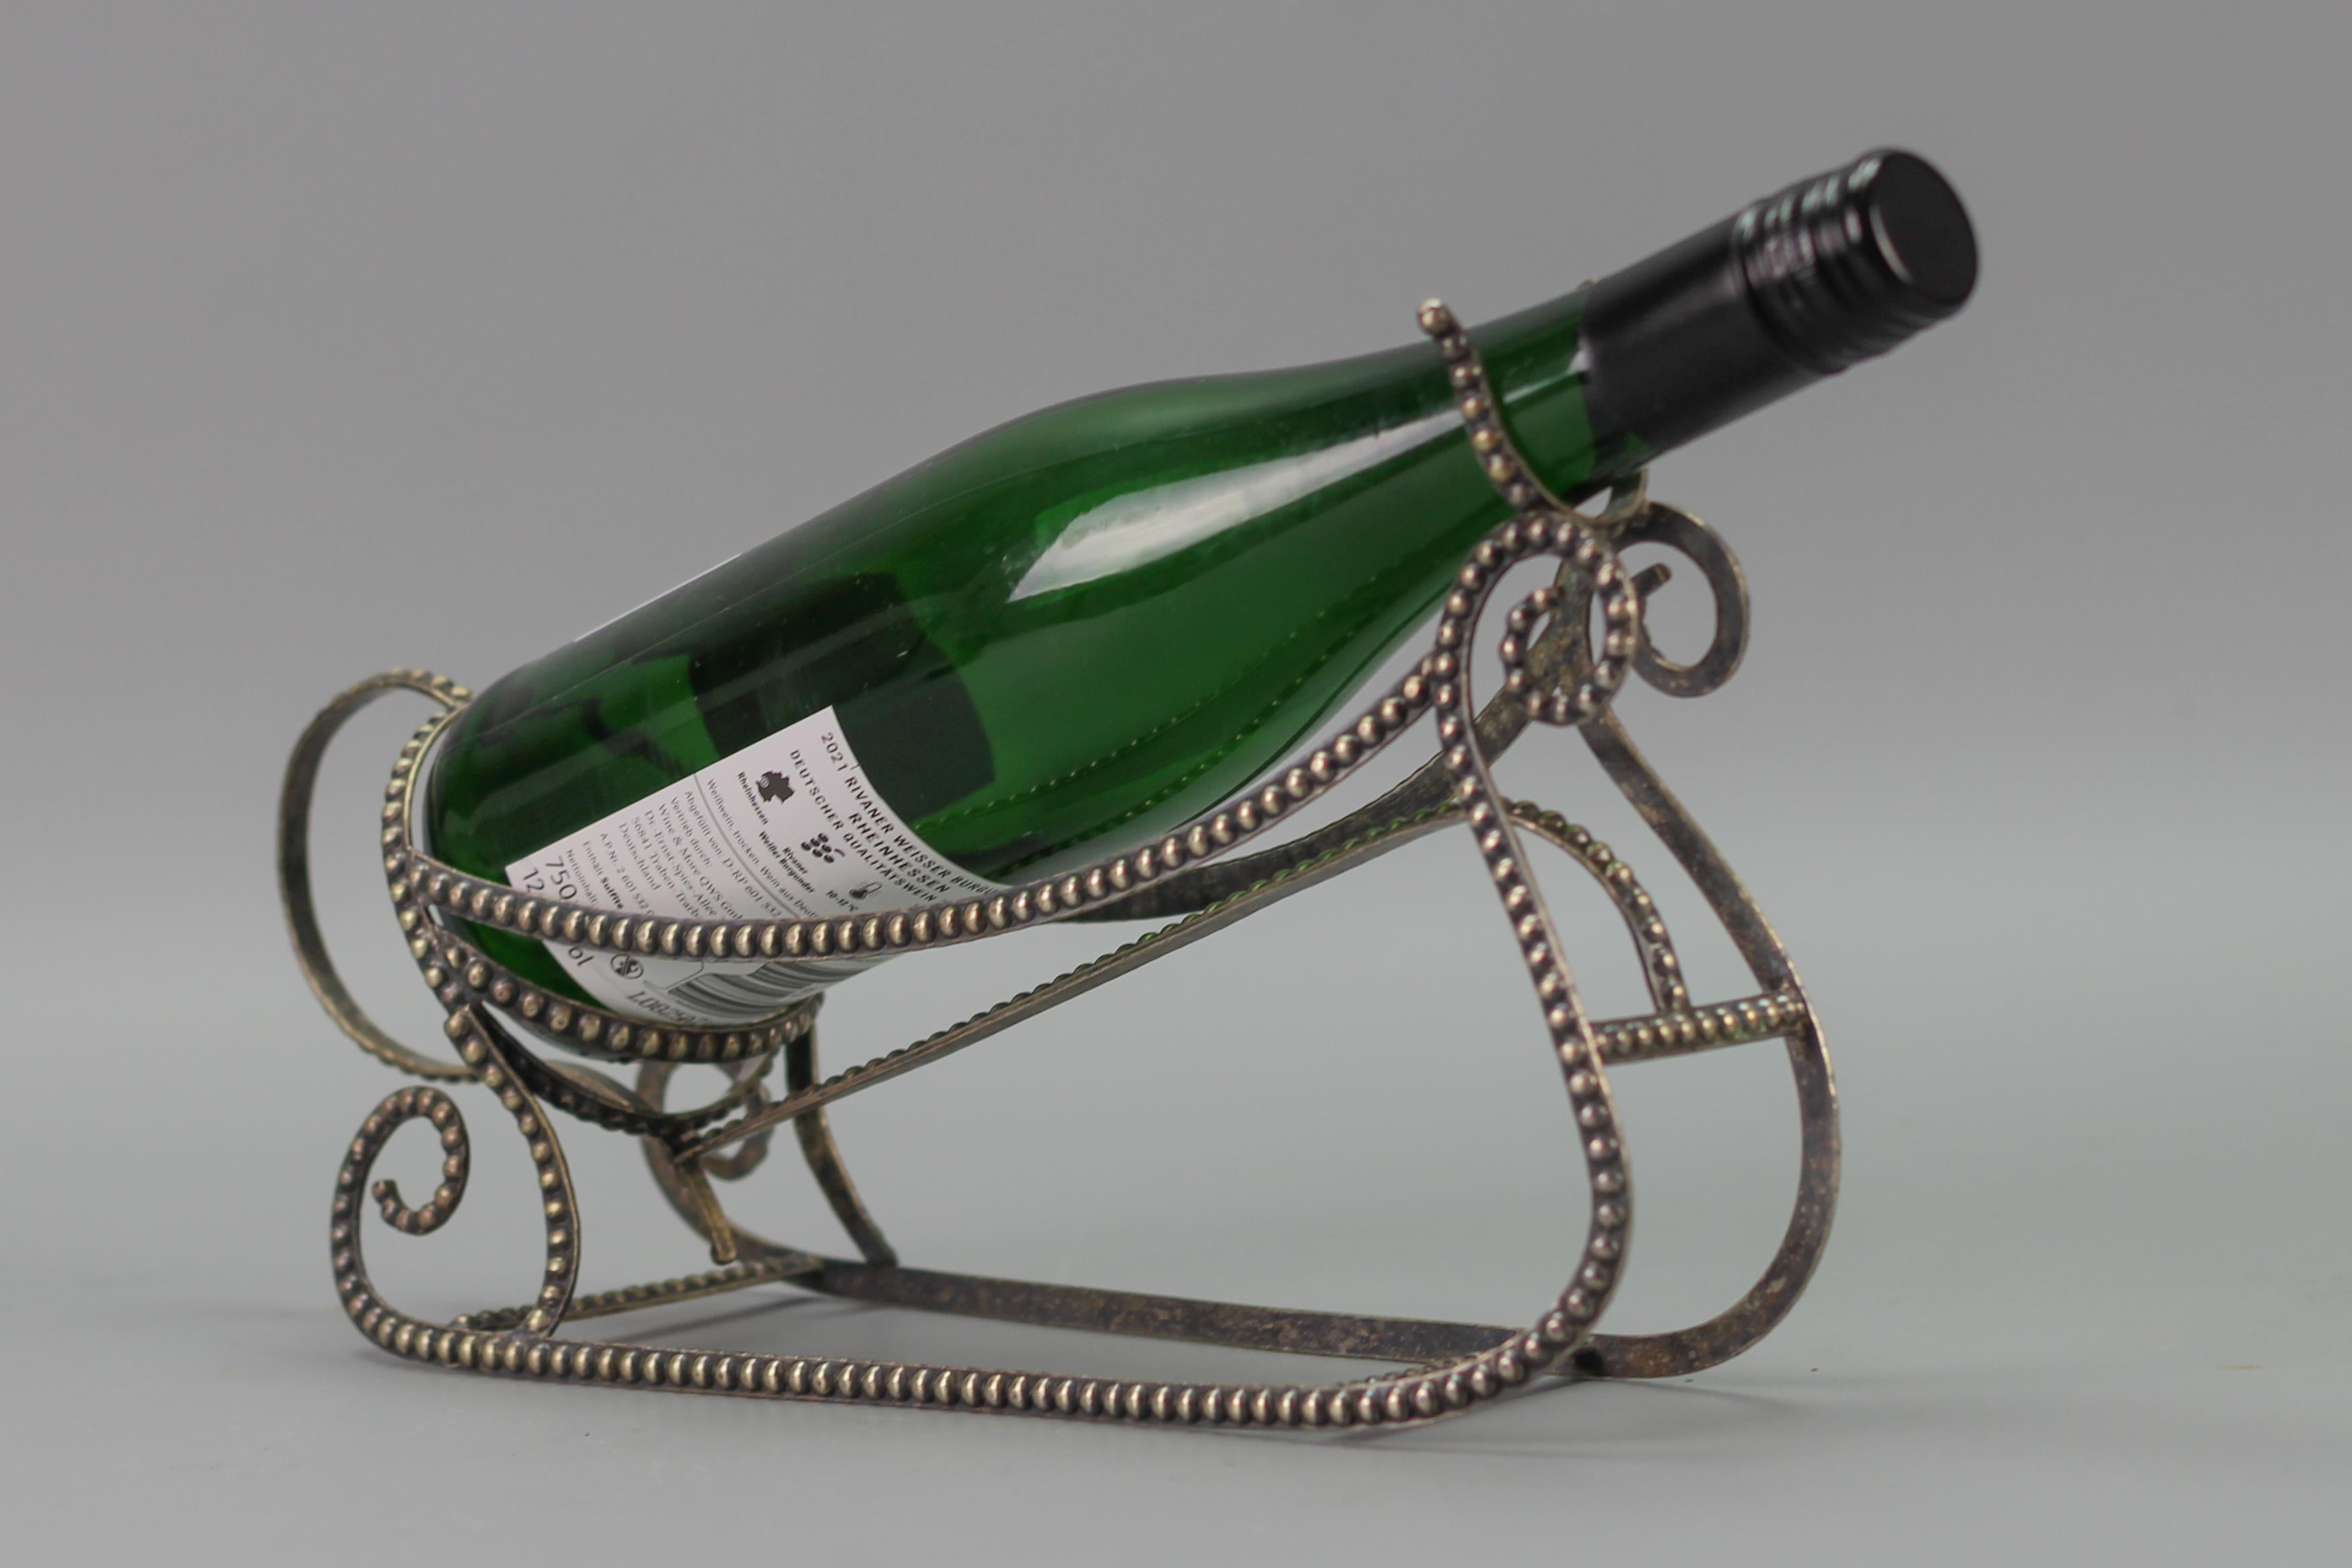 Art Deco Style Brass Silver Color Sleigh-Shaped Bottle Holder from circa the 1950s.
An elegant silver color wine bottle holder made of brass in the shape of a sleigh, throughout decorated with brass beading.
Dimensions: height 18.5 cm / 7.28 in,